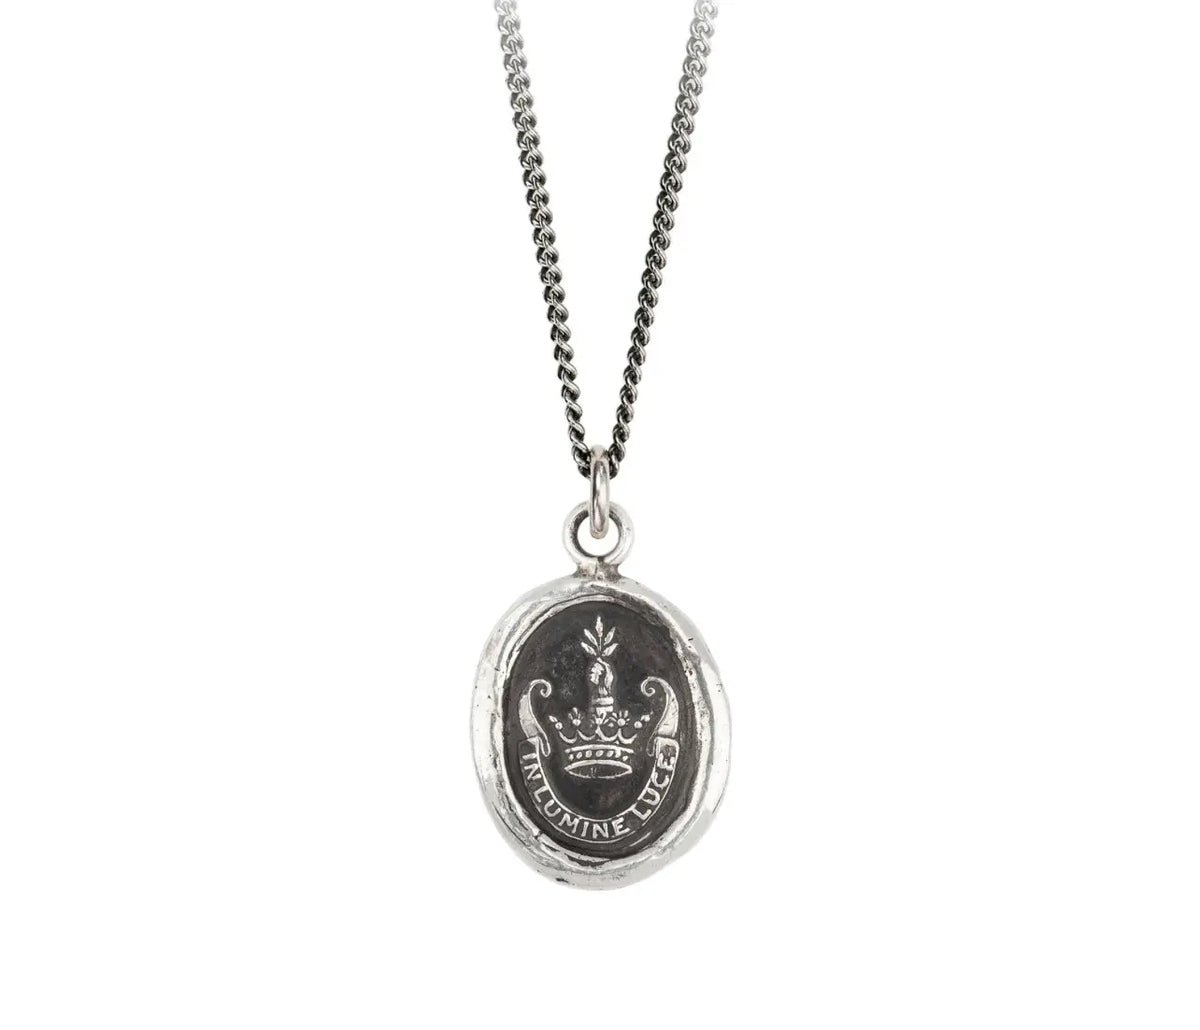 This talisman reads &#39;In Lumine Luce&#39; in Latin, which means &#39;Shine in the Light&#39;. The arm coming out of a crown is symbolic of leadership and achievement. It is holding a sheaf of wheat which represents the fruition of one&#39;s hopes and dreams.   Handcrafted in Vancouver, Canada Cast in 100% recycled sterling silver or bronze Sterling silver chain 18 inches and lobster clasp with Pyrrha branded quality tag Meaning card (handmade from recycled materials)